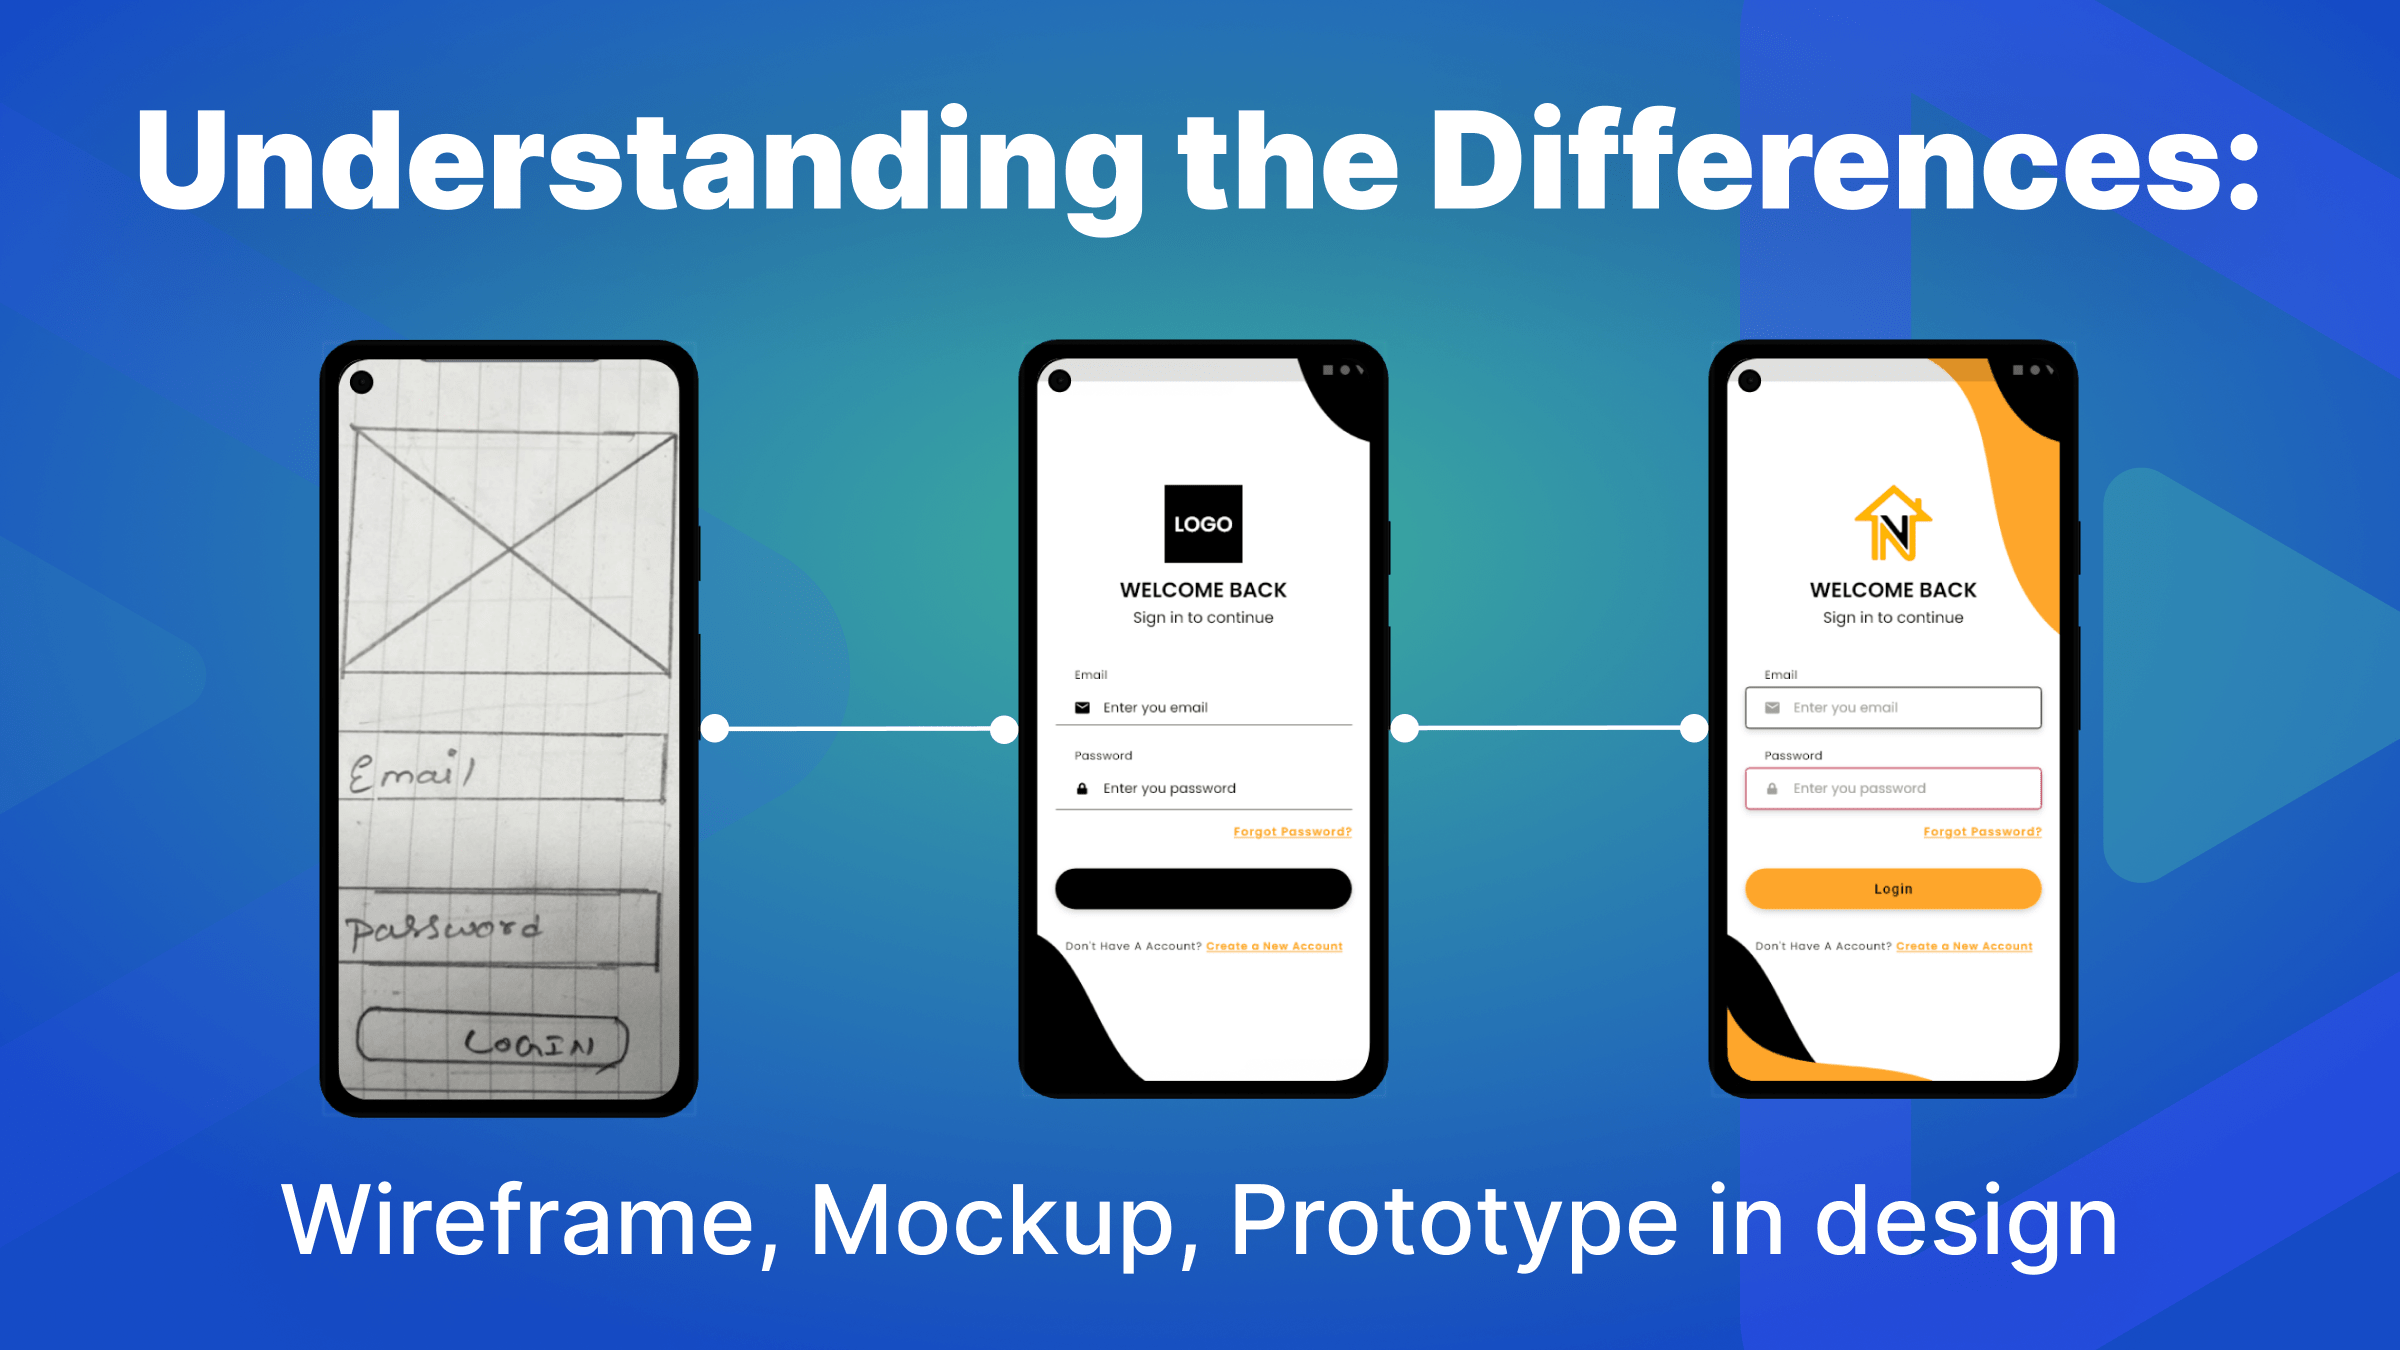 Prototypes, Mockups, Wireframes: what's the difference?